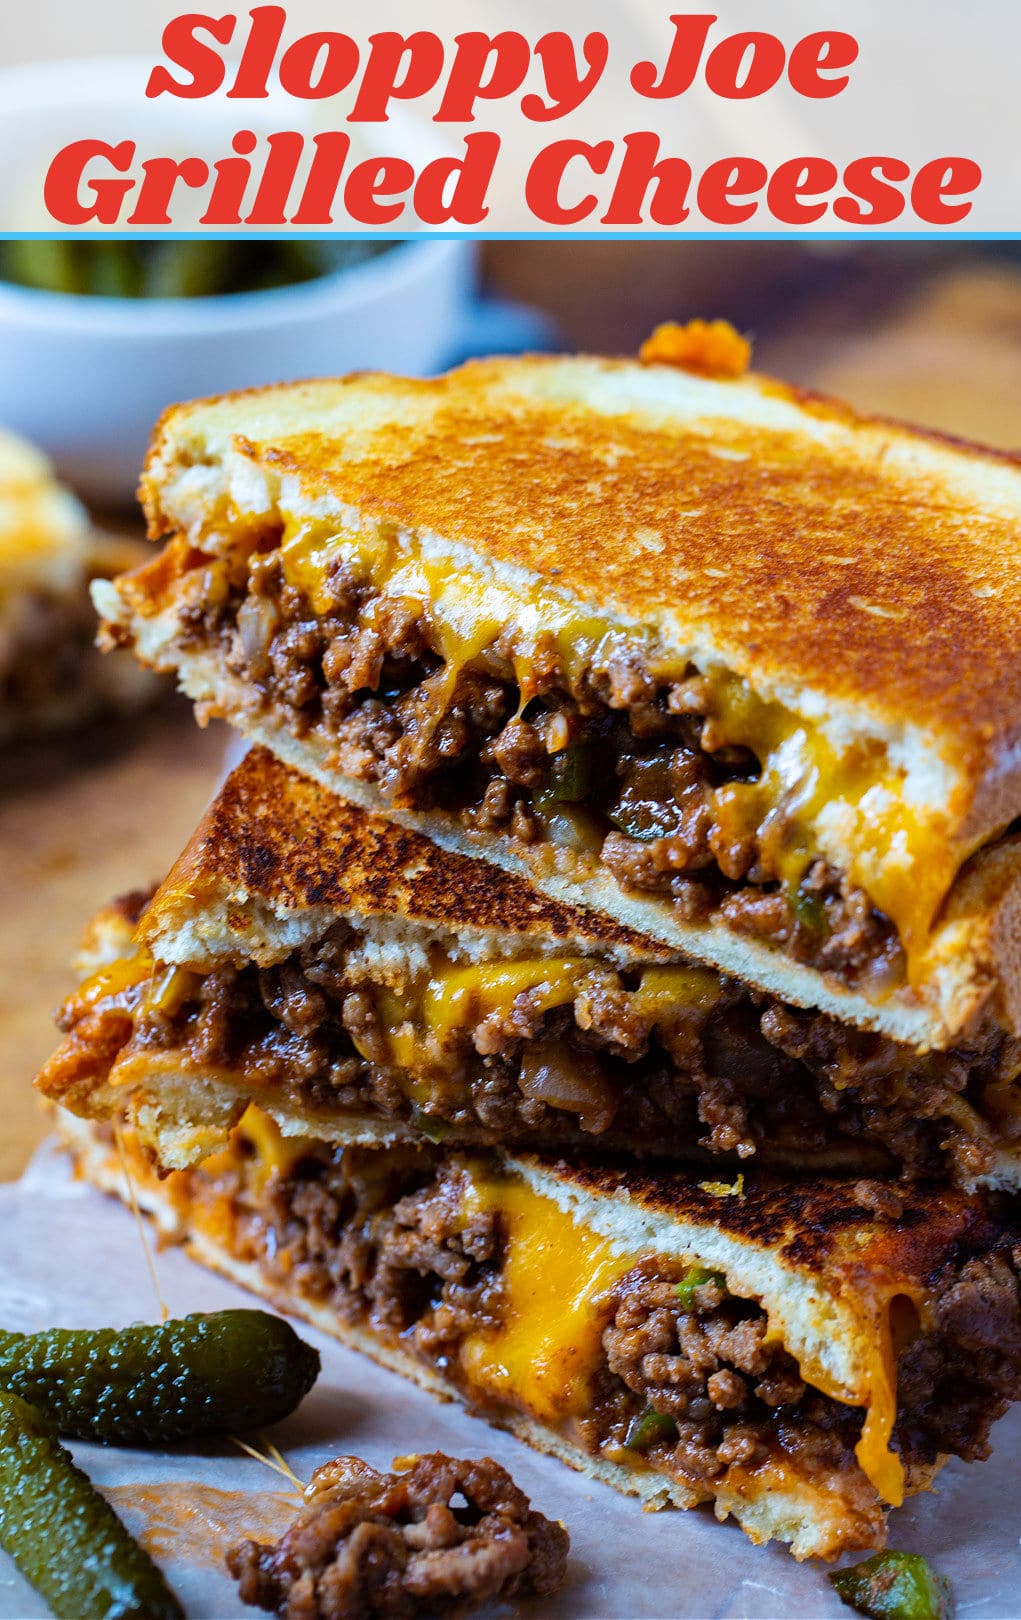 Sloppy Joe Grilled Cheese halves stacked on top of each other.